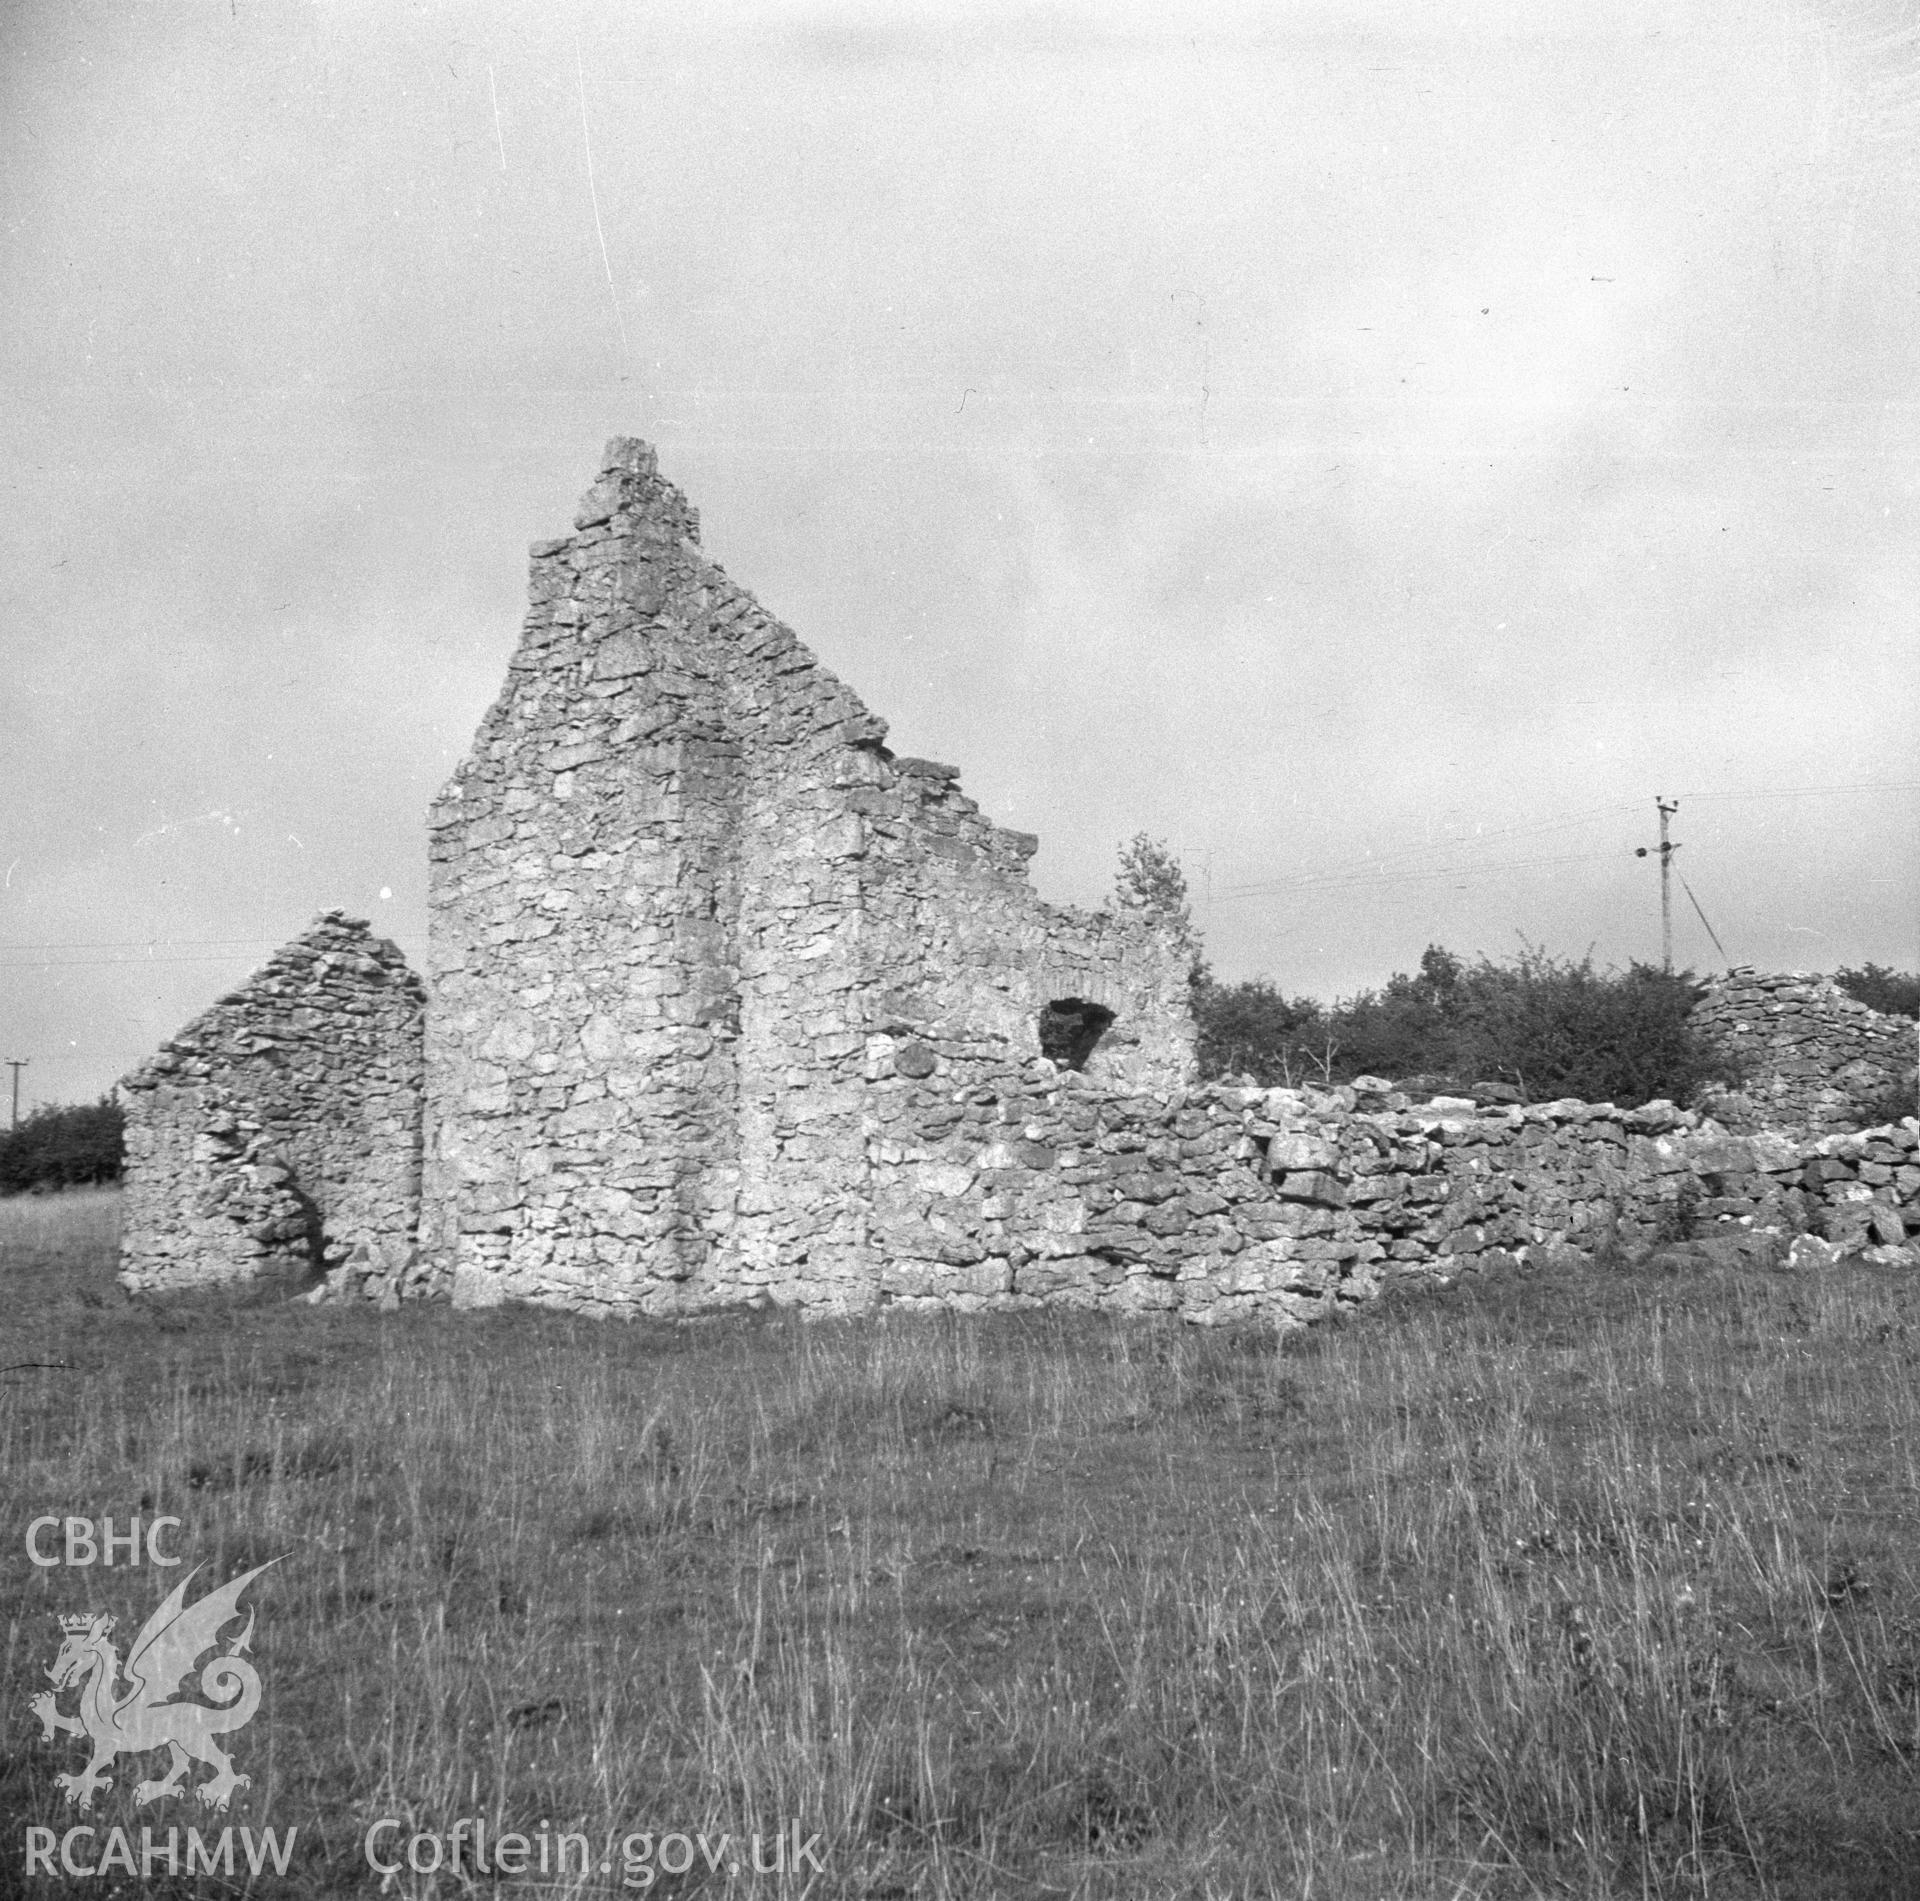 Digital copy of a black and white nitrate negative showing exterior view of an unidentified ruined house in Brynford community, Flintshire.